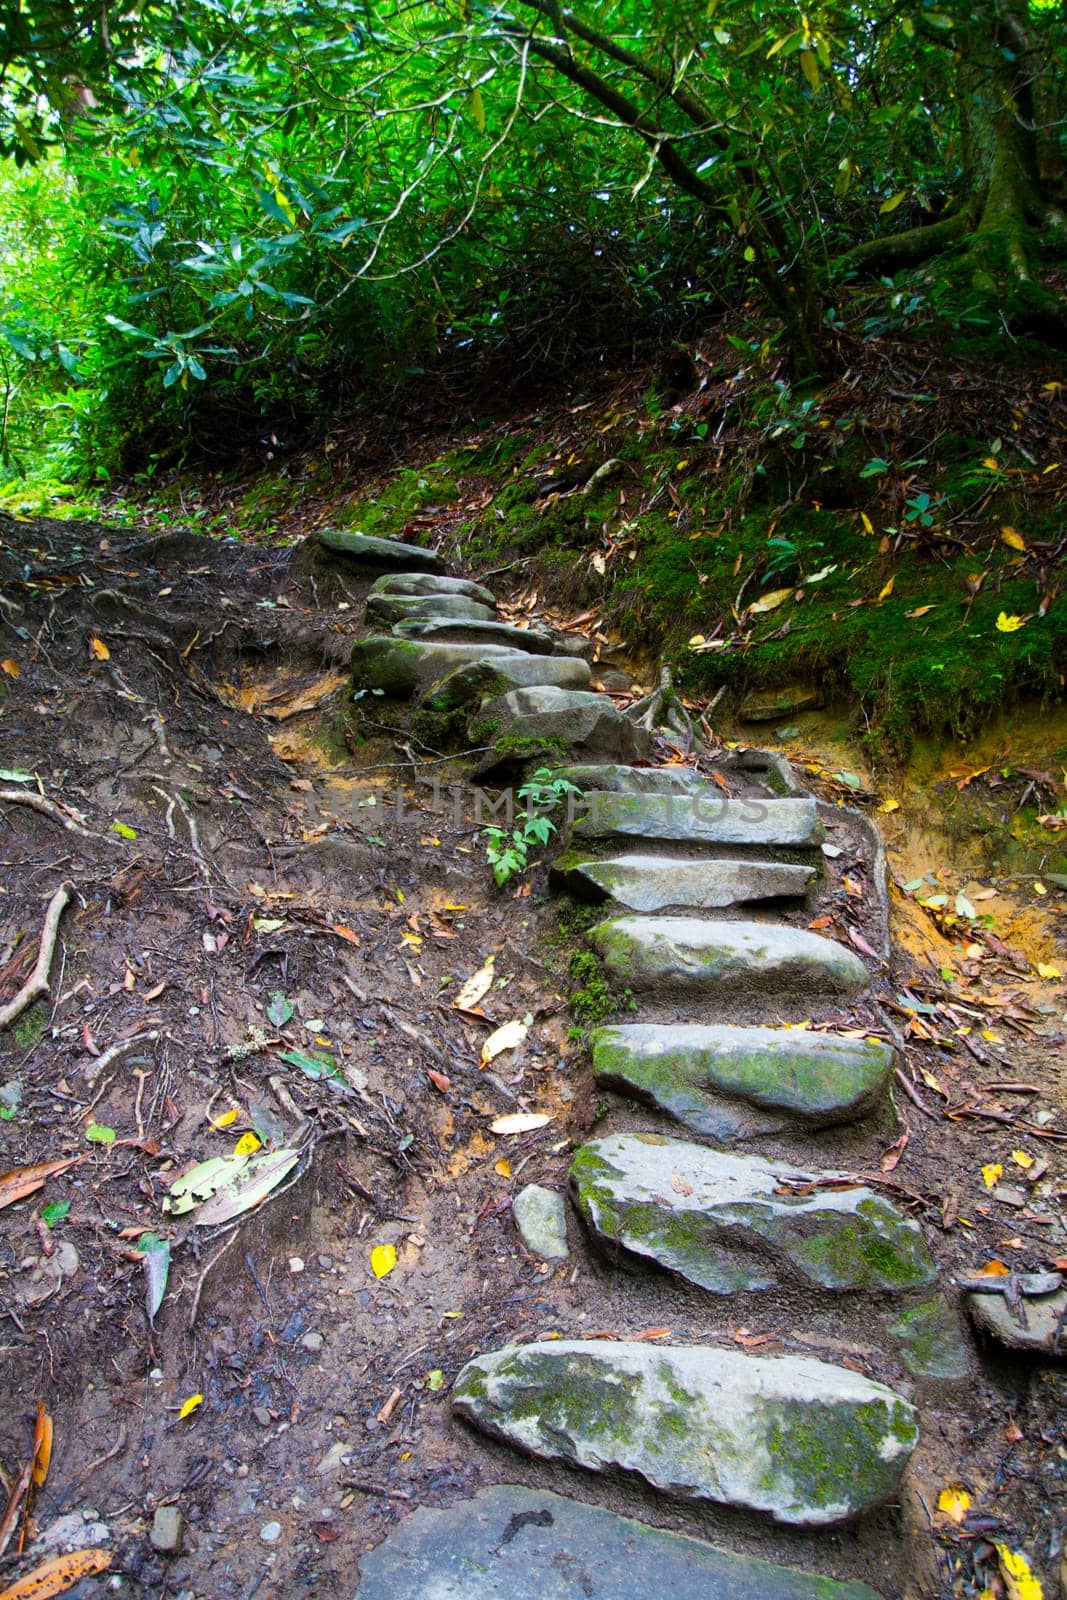 Explore the enchanting allure of a hidden forest staircase in Gatlinburg, Tennessee. Immerse yourself in nature's tranquility amidst lush foliage and weathered stone steps, offering a rustic pathway to adventure and serenity.